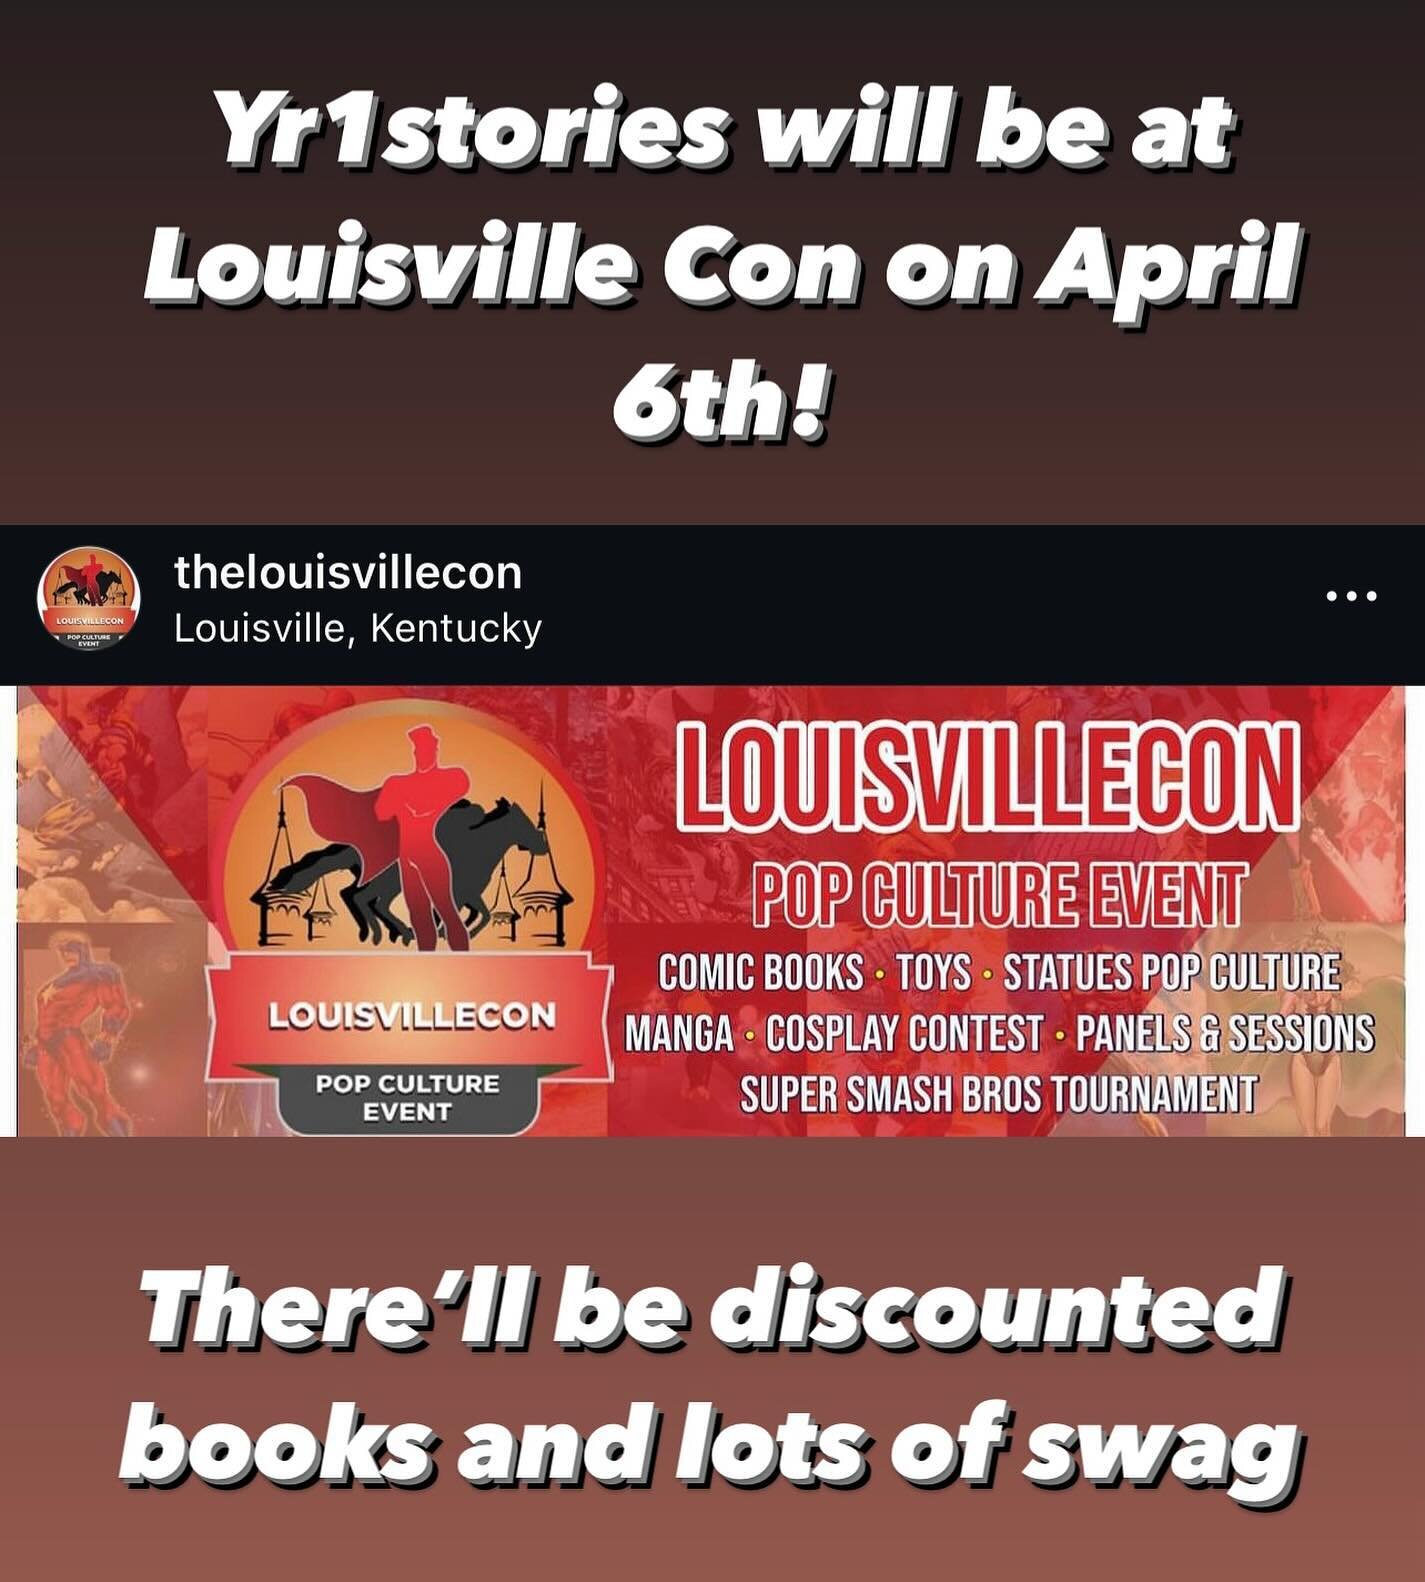 Louisville Con is gonna be a lot of fun!
I&rsquo;ll be there April 6th selling books and handing out fun swag!!